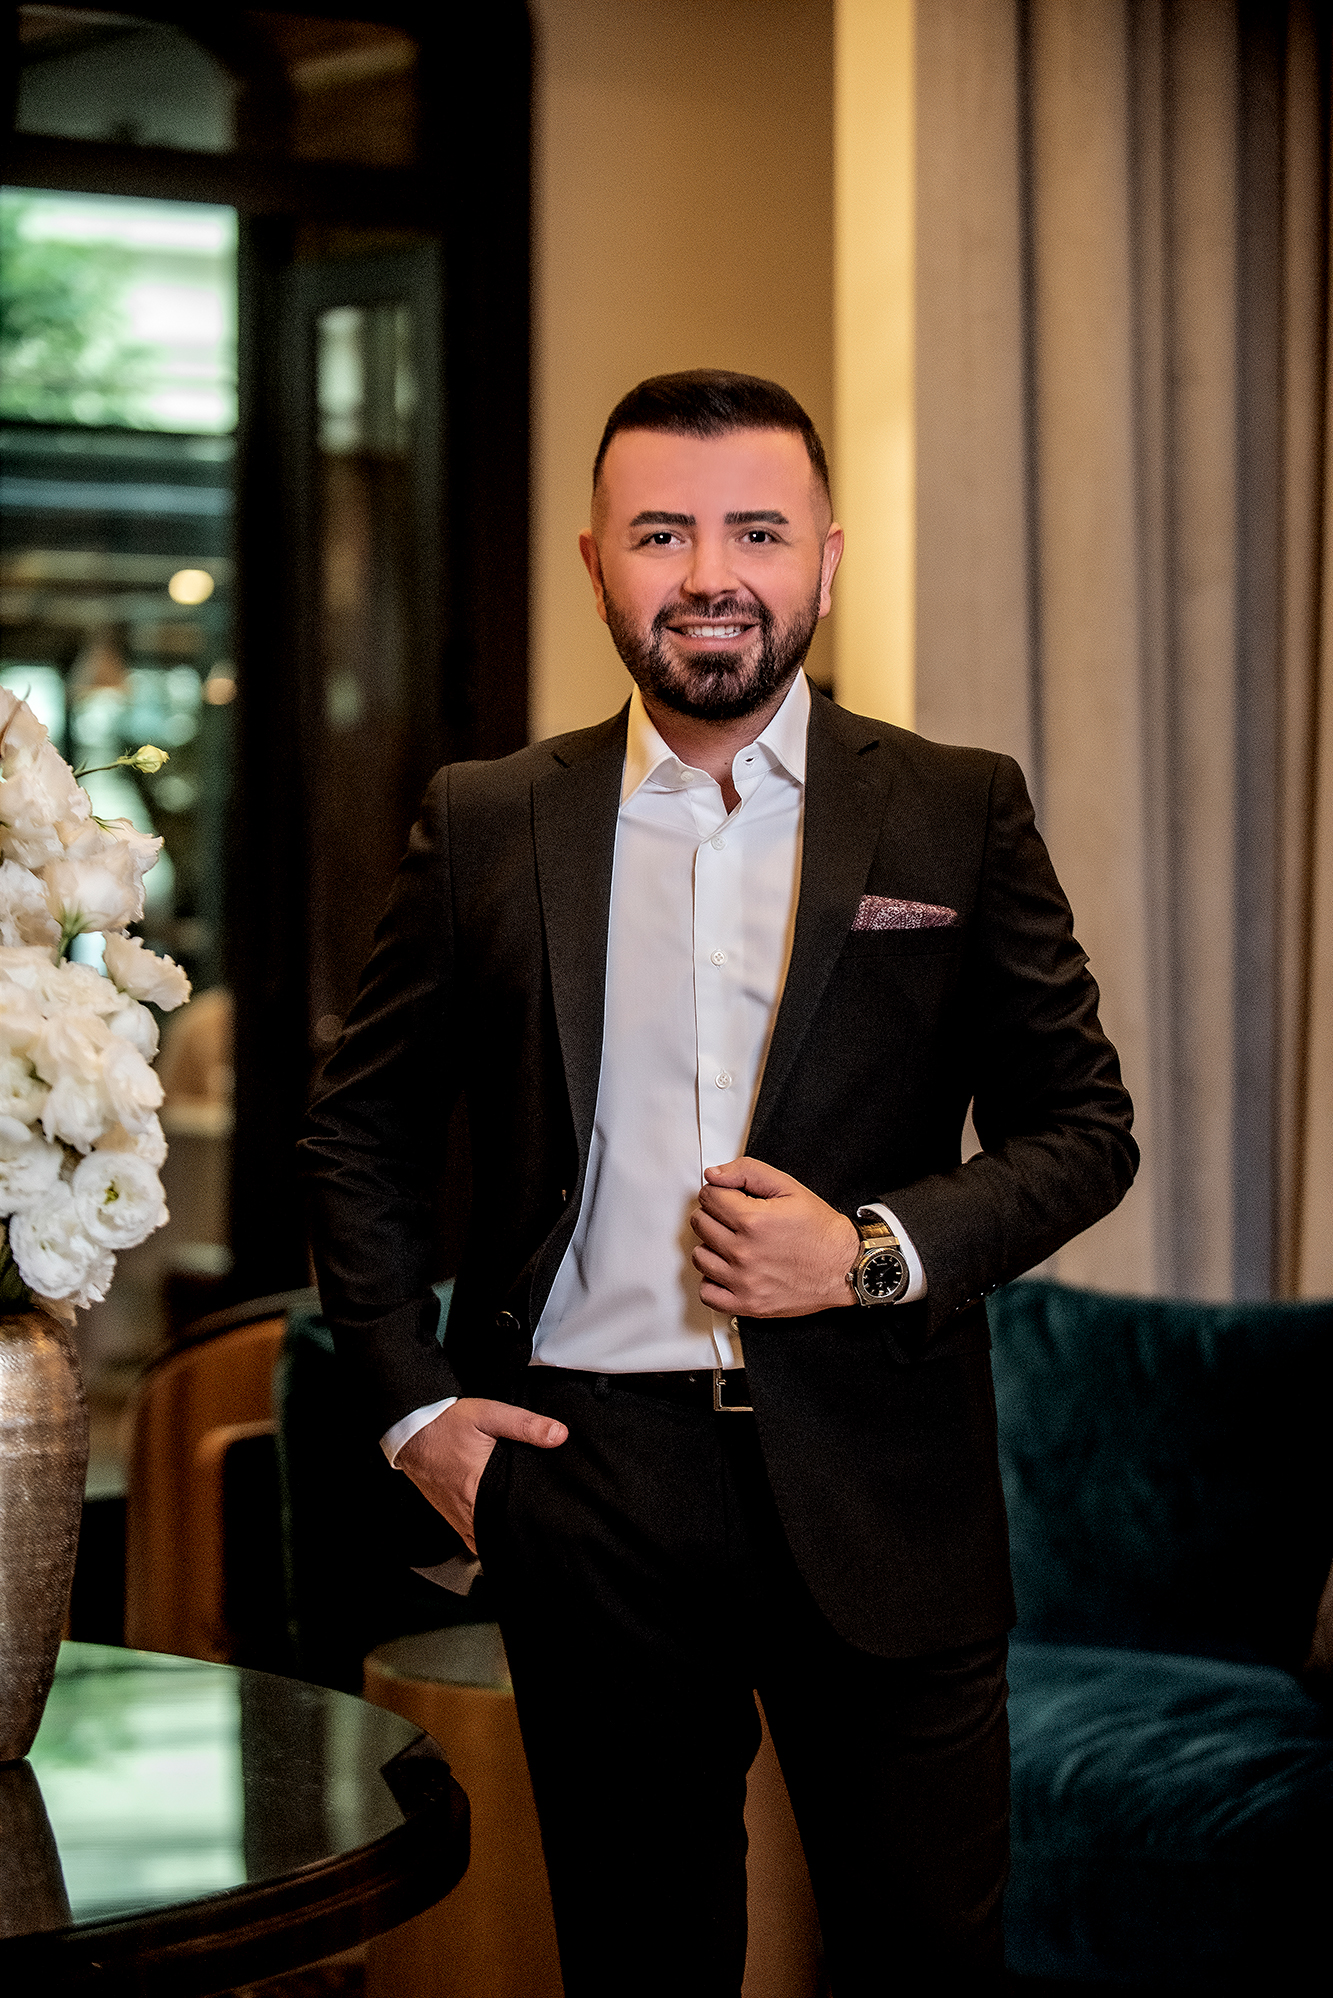 New Executive Assistant Manager at Matild Palace Budapest